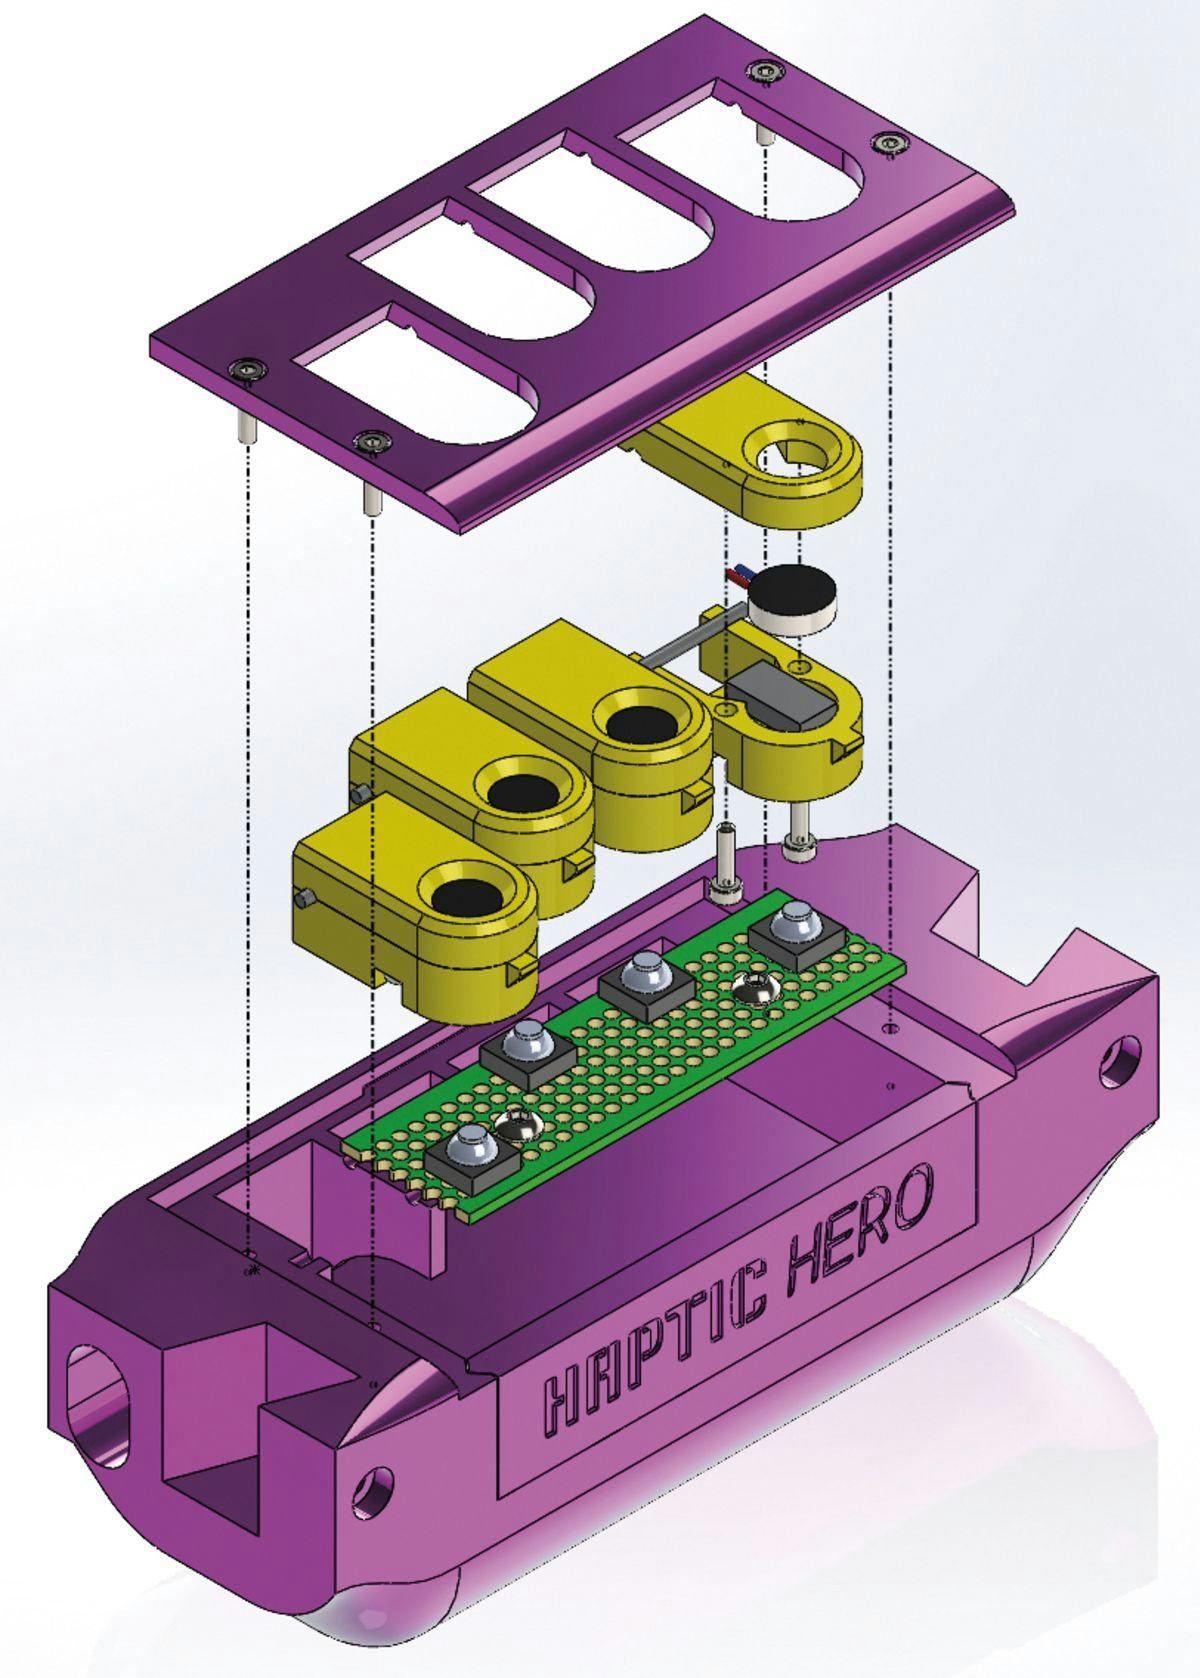 A graphic offers an inside view of a key component of the Haptic Hero game.